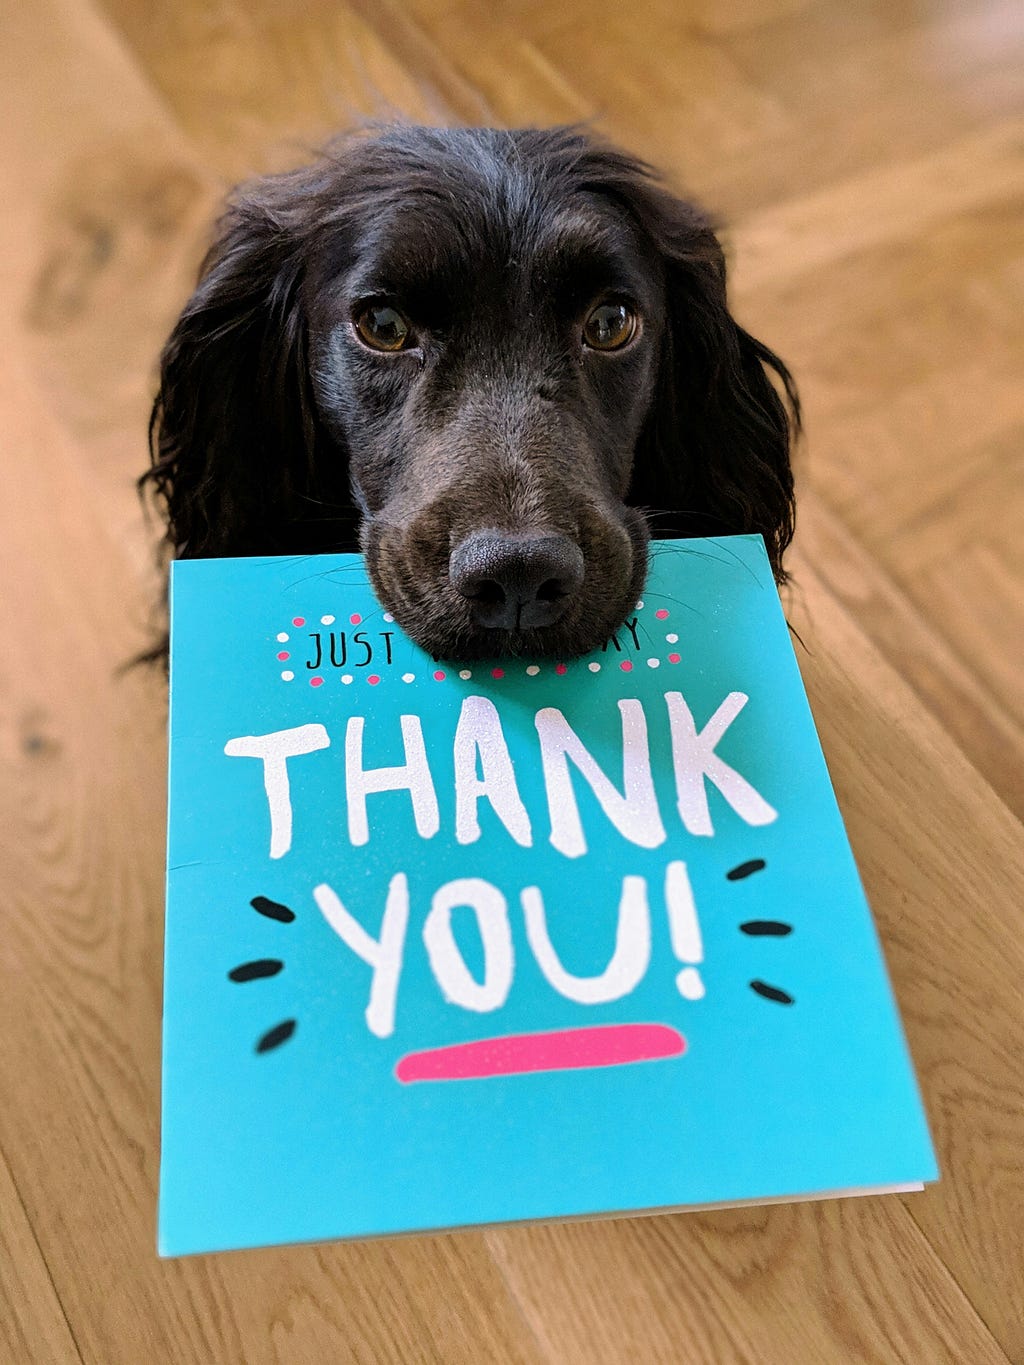 This image depicts a dog holding a piece of cardboard with the words “Thank you!” written on it.